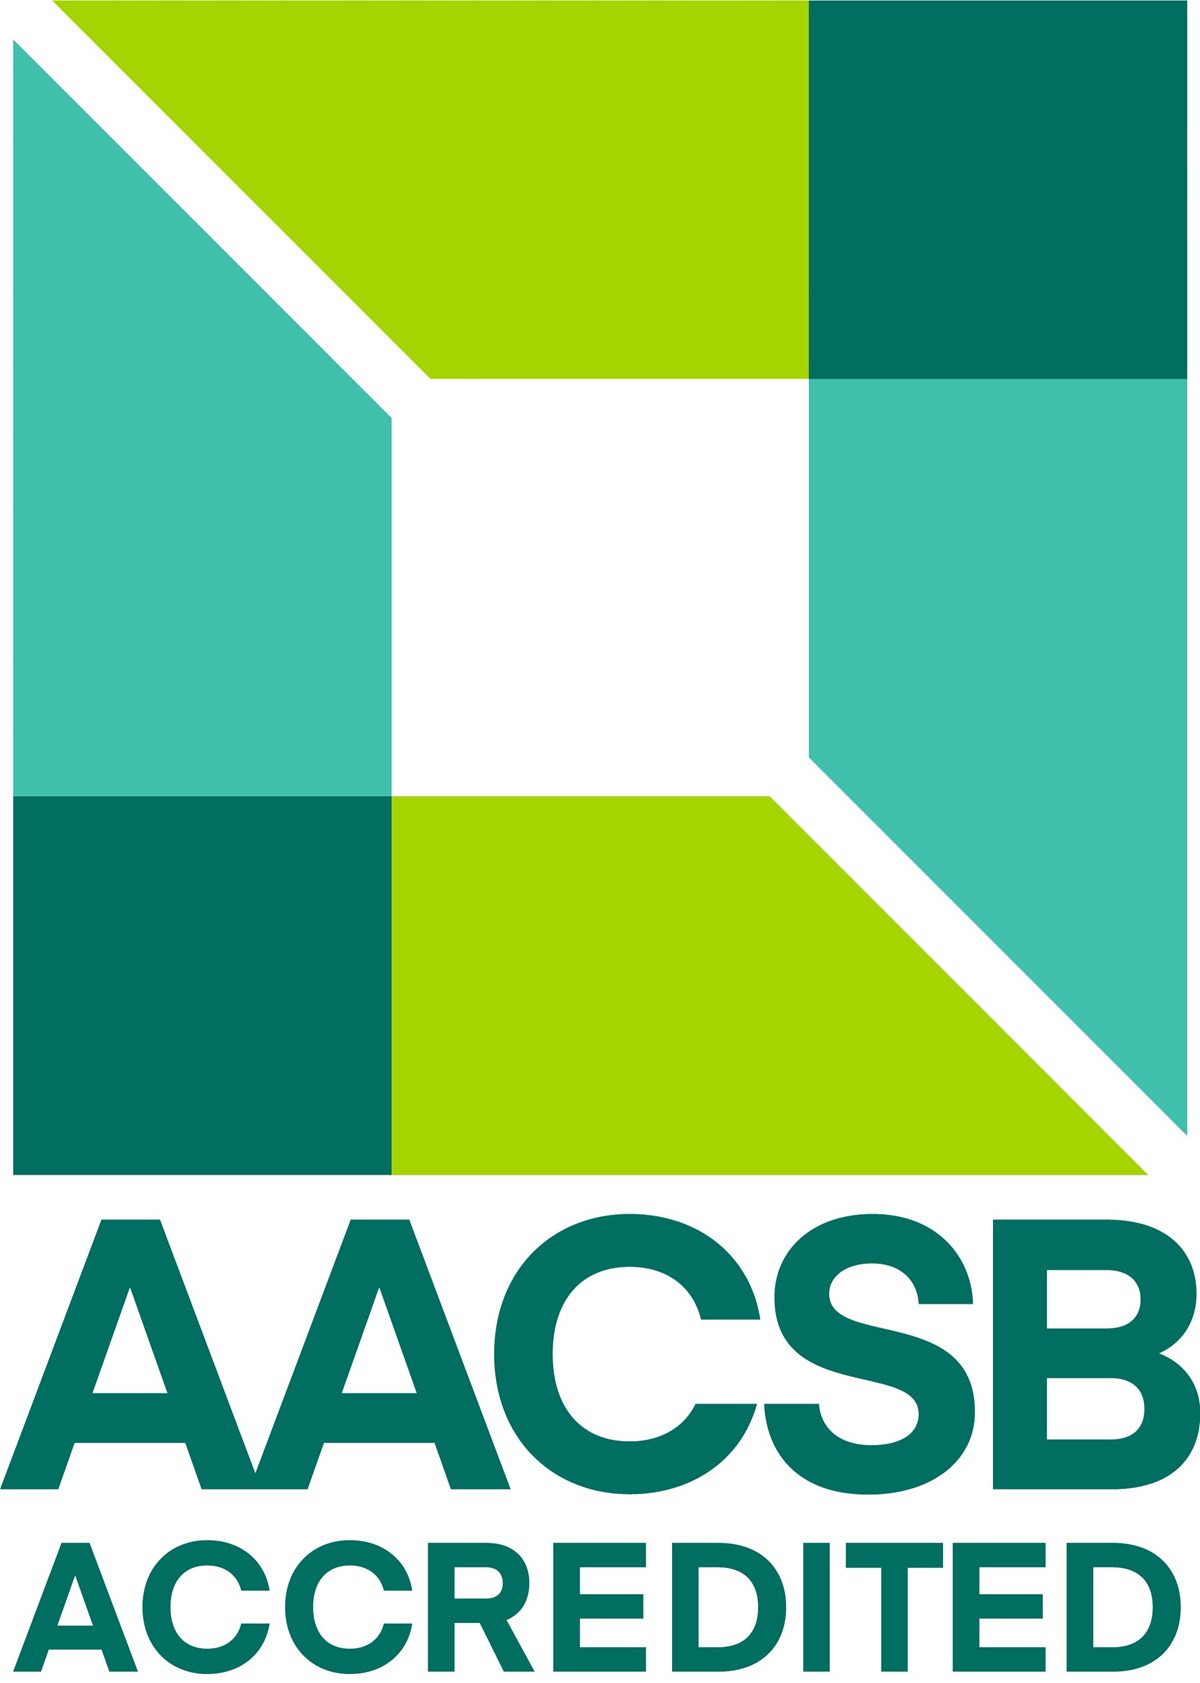 Green graphic square with words AACSB (Association to Advance Collegiate Schools of Business International) Accredited below it. 